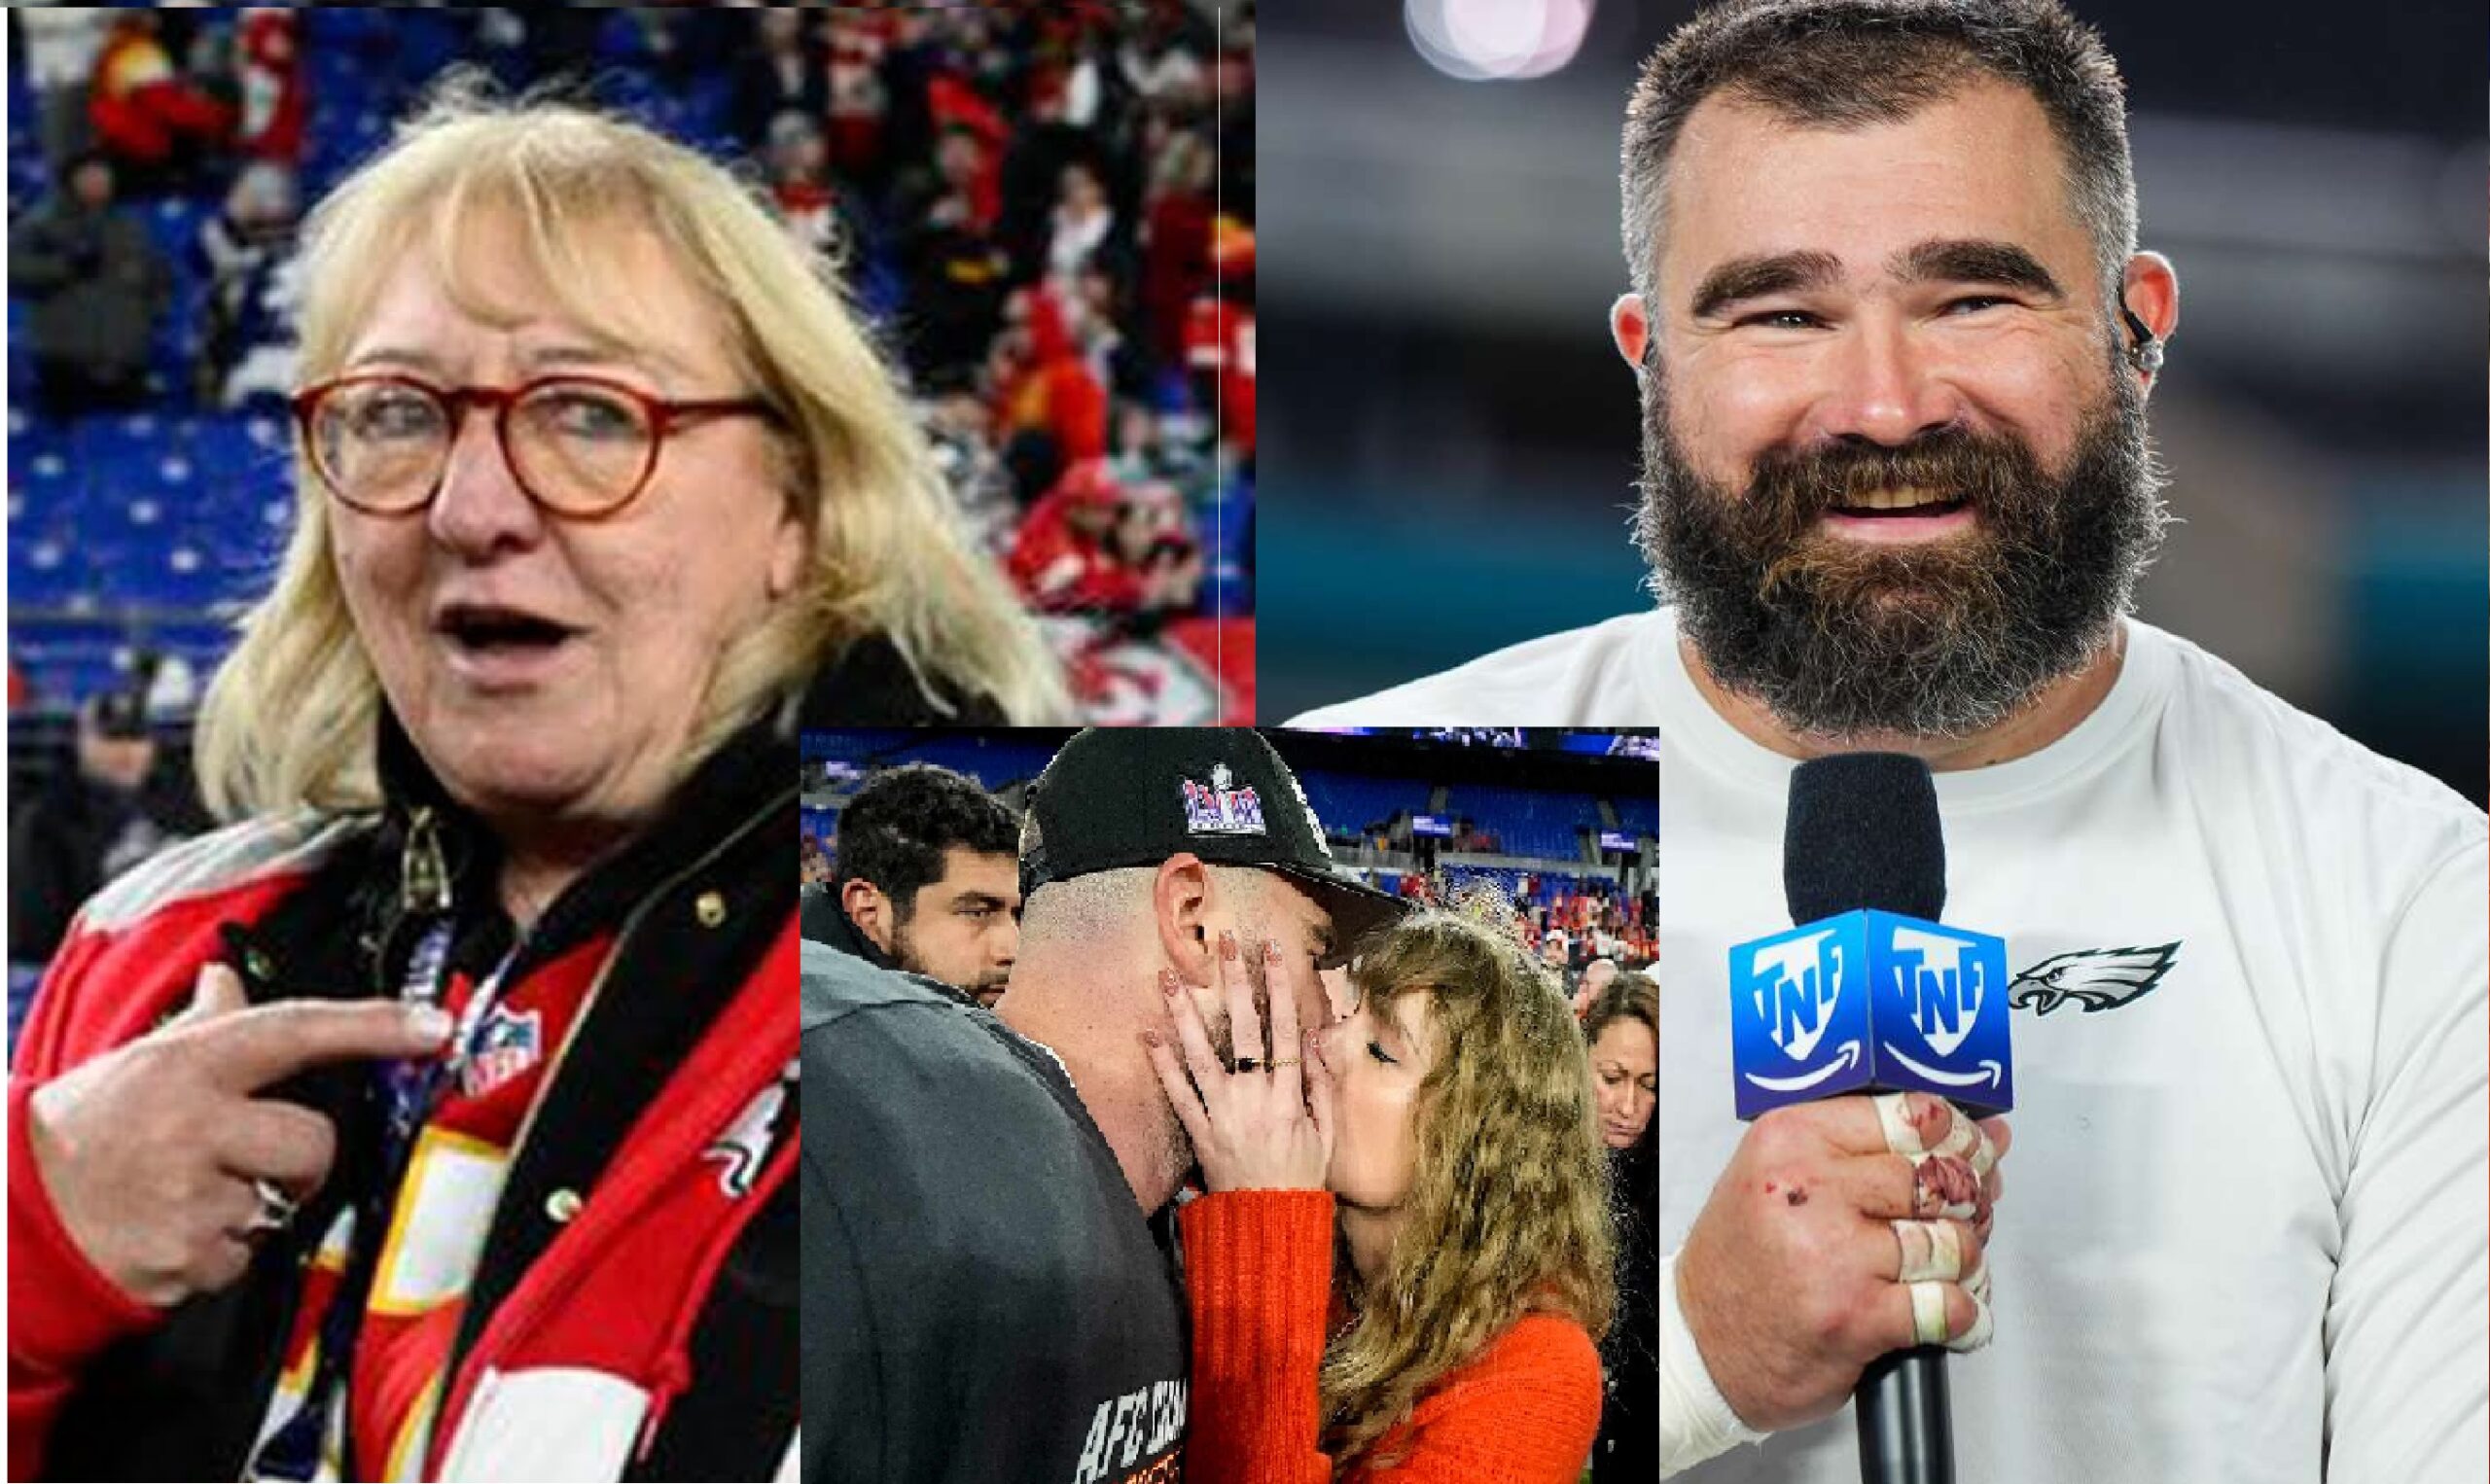 "Donna Kelce Commends Son Jason for Pledging Support in Funding Travis and Taylor Swift's Wedding: 'Just Take the Leap, Bro! I've Got the Rest Covered,' Jason Encourages His Brother"